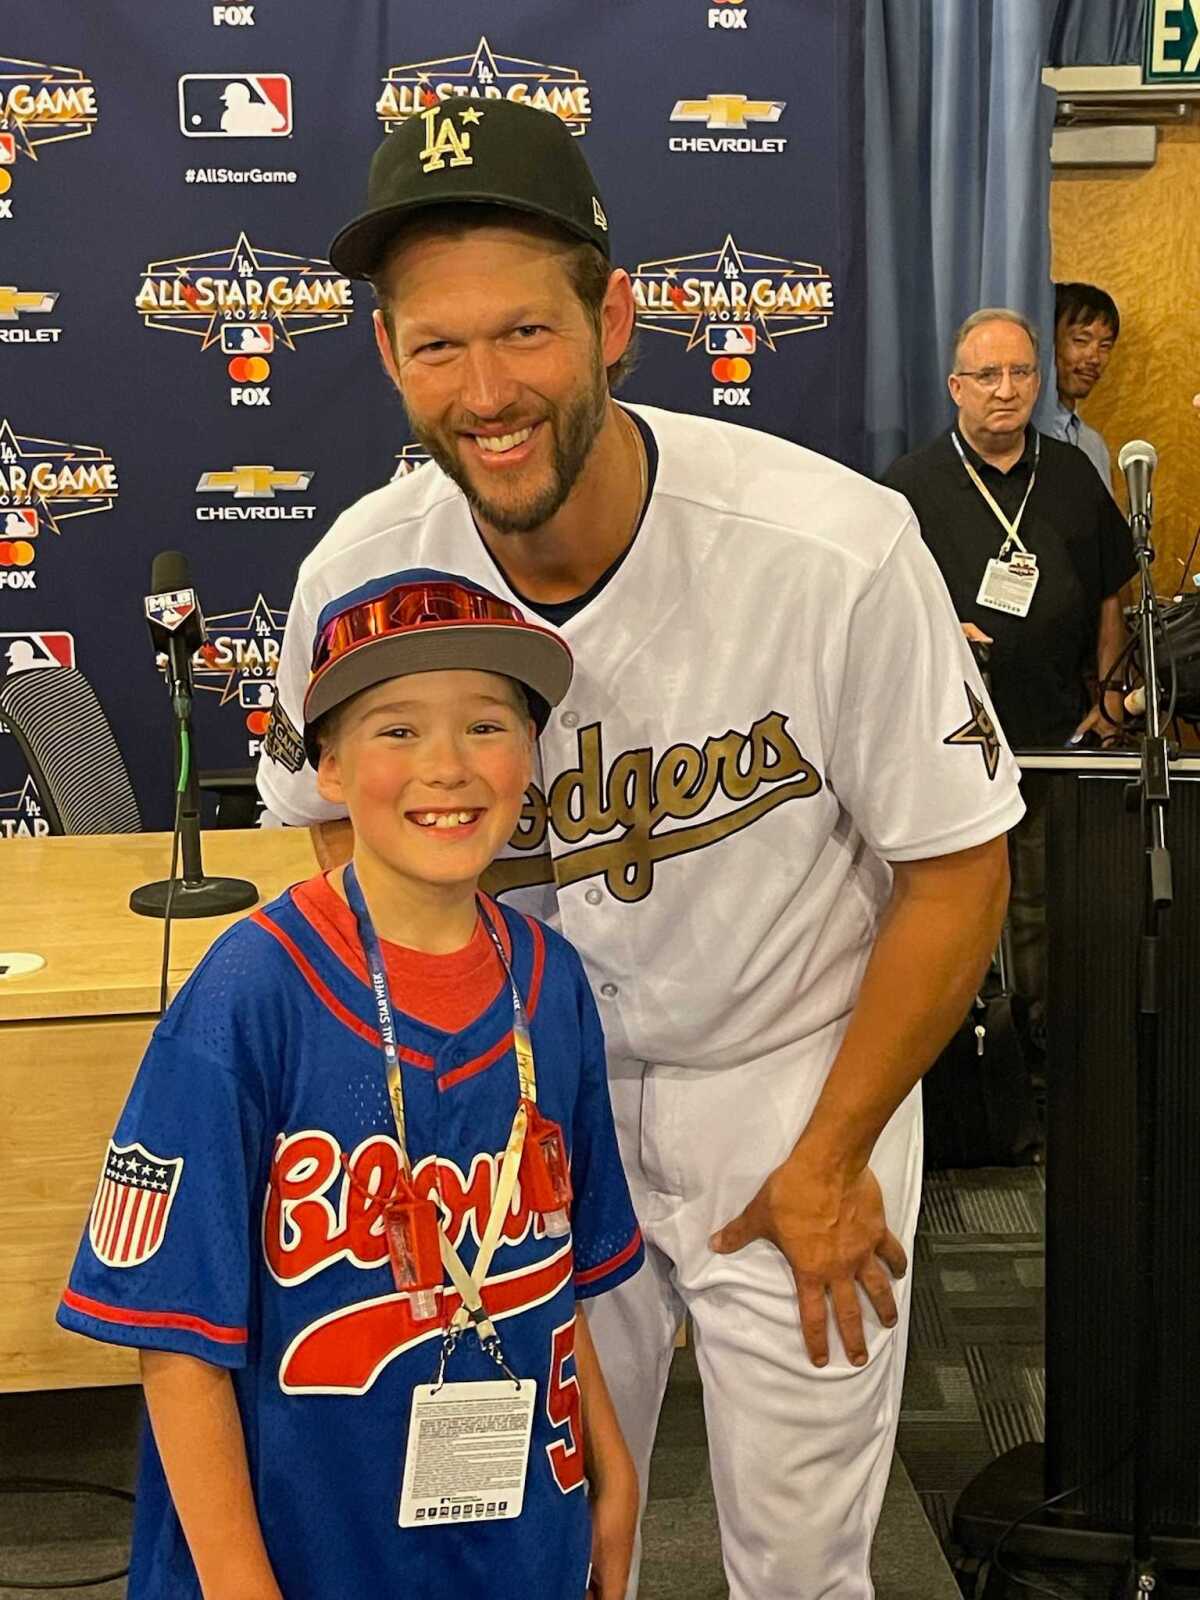 Clayton Kershaw and Blake Grice pose for a photo in a Dodger Stadium press conference room Tuesday.